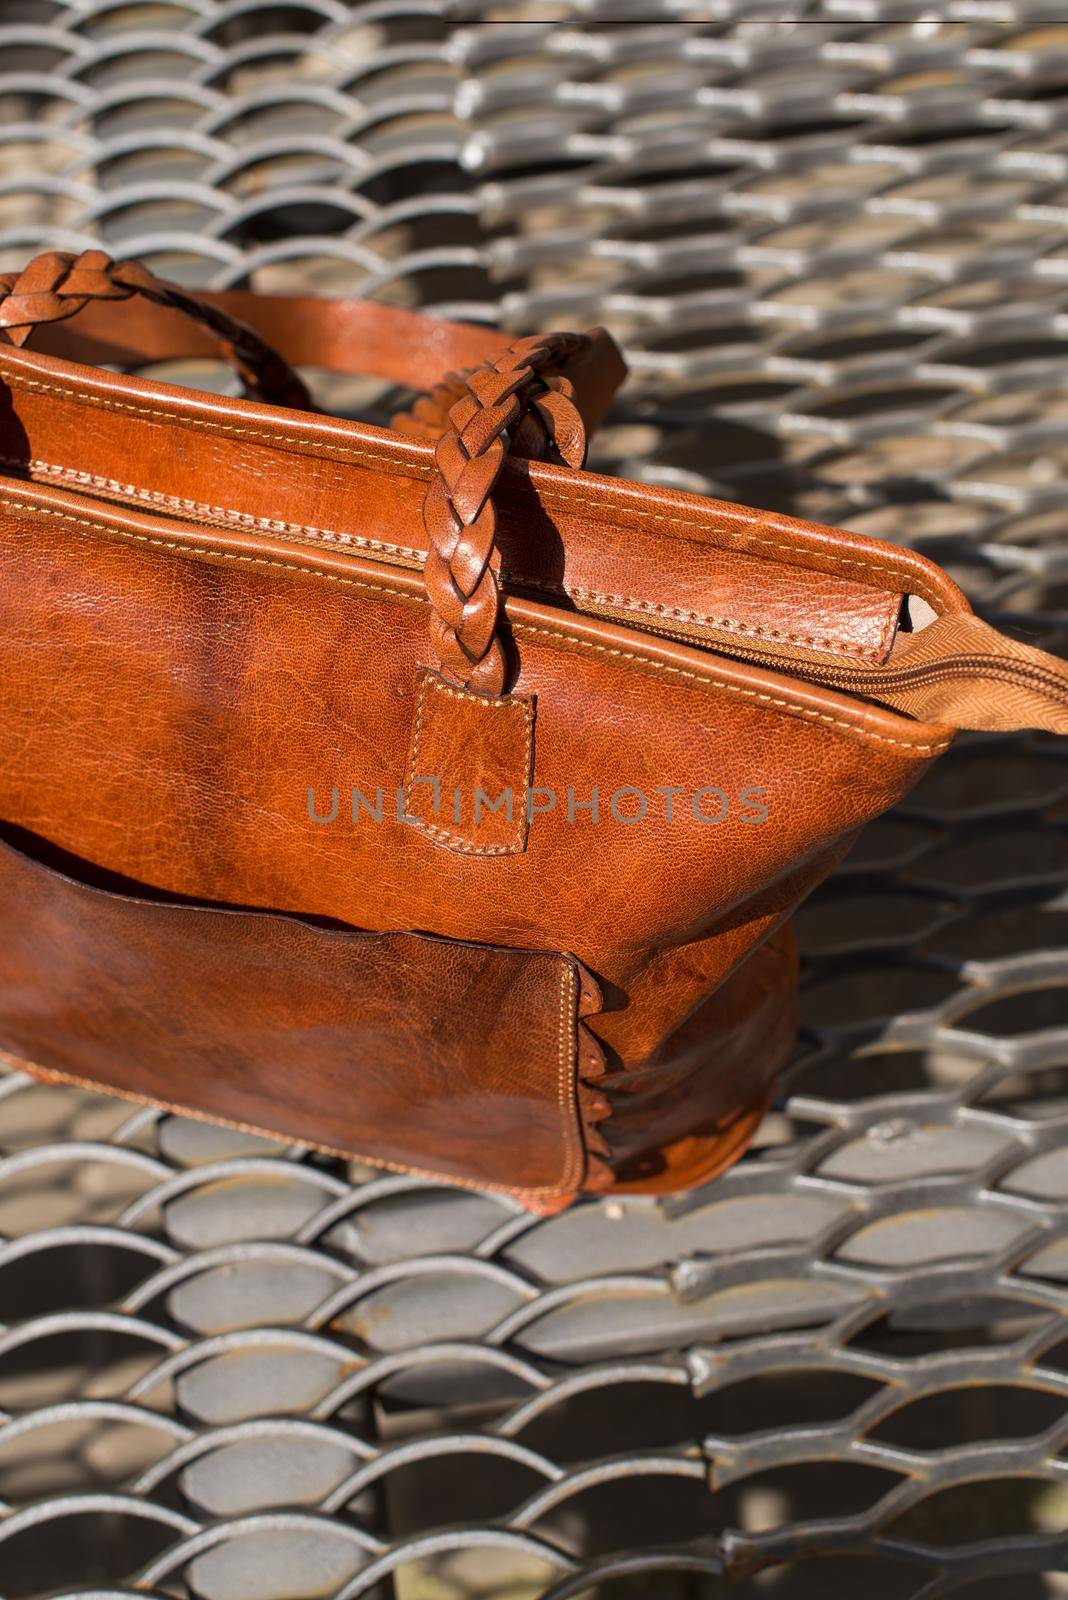 close-up photo of orange leather bag on a metal texture background by Ashtray25